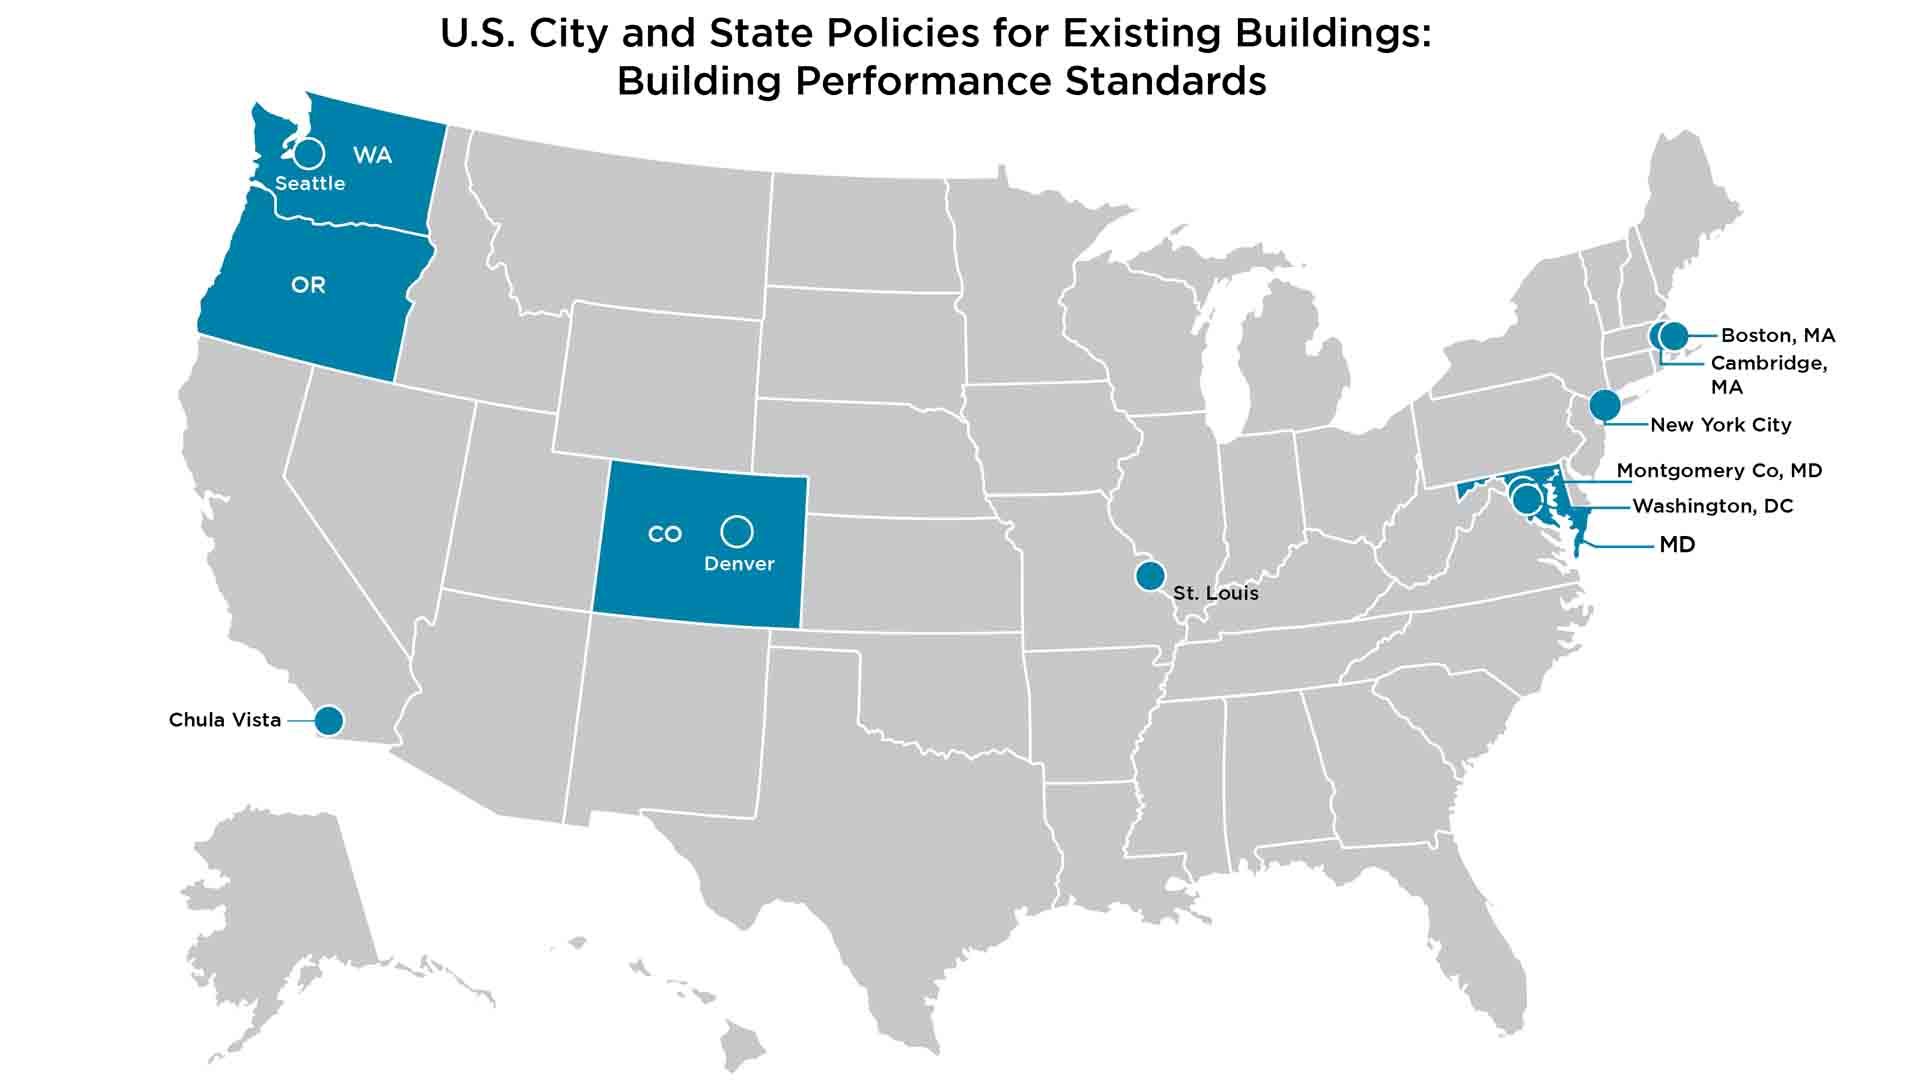 Map of U.S. City and State Policies for Existing Buildings indicating building performance standards